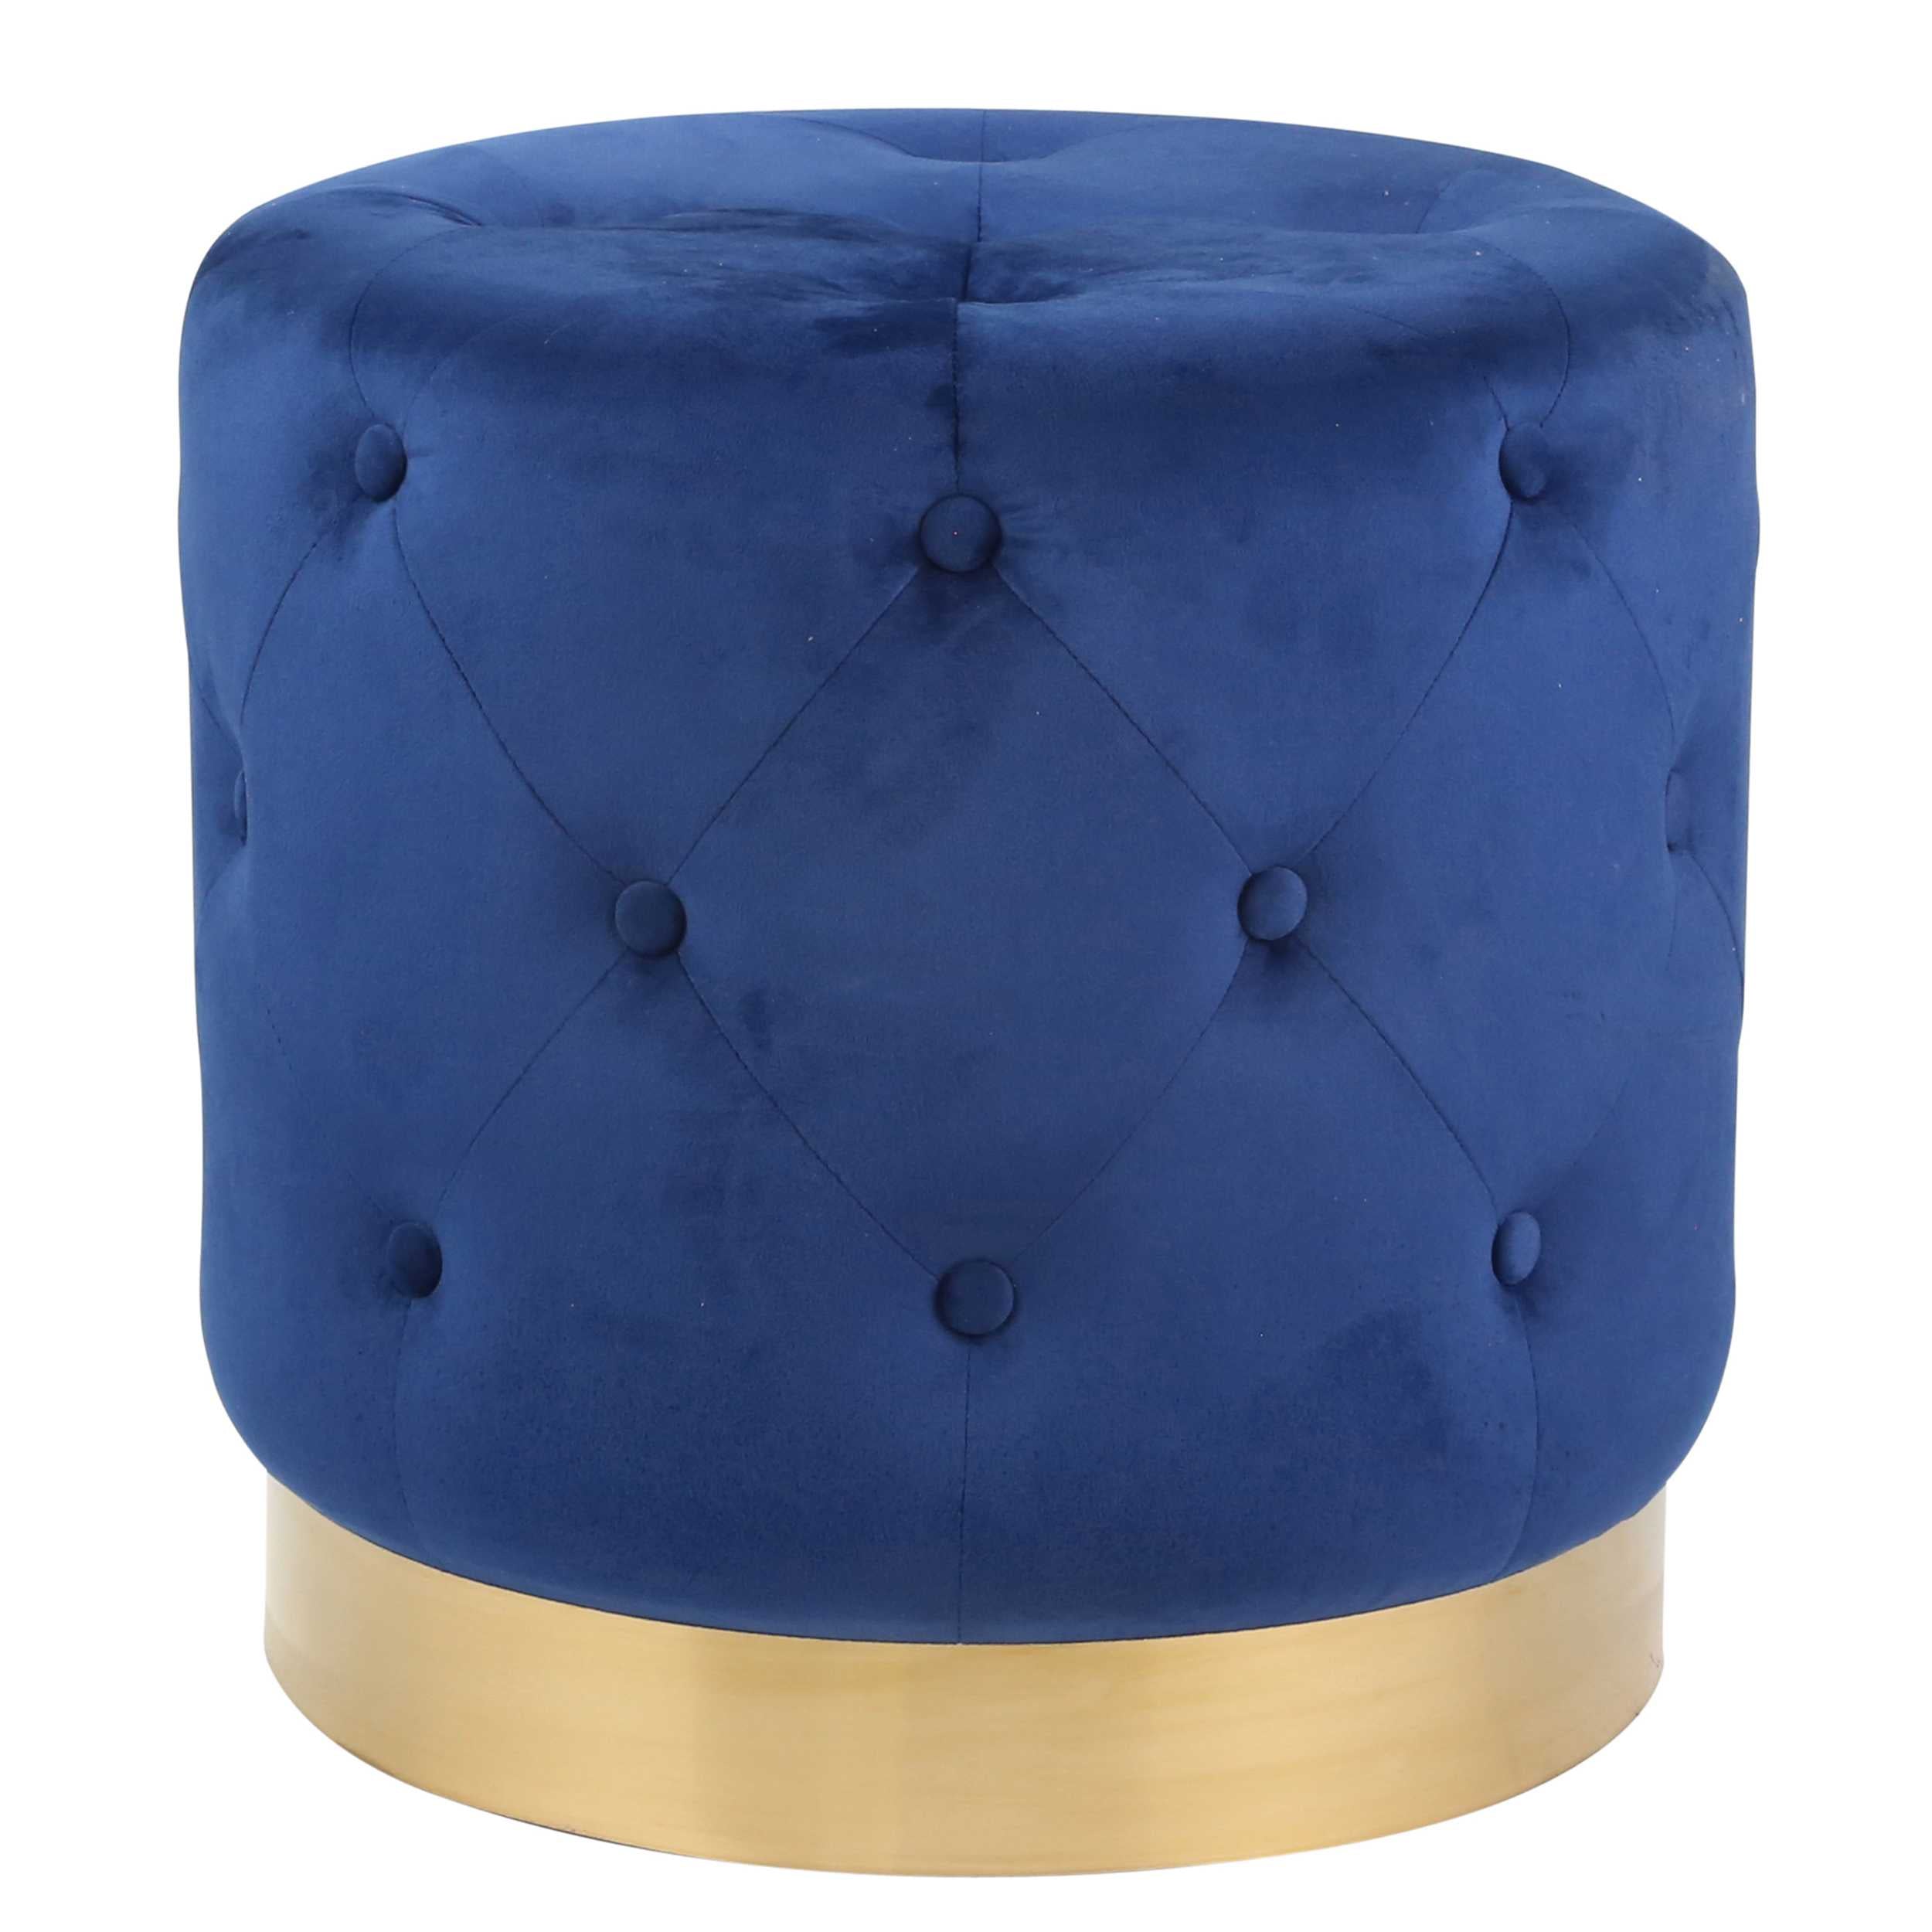 Fabric Upholstered Tufted Ottoman with Metal Base, Navy Blue and Gold